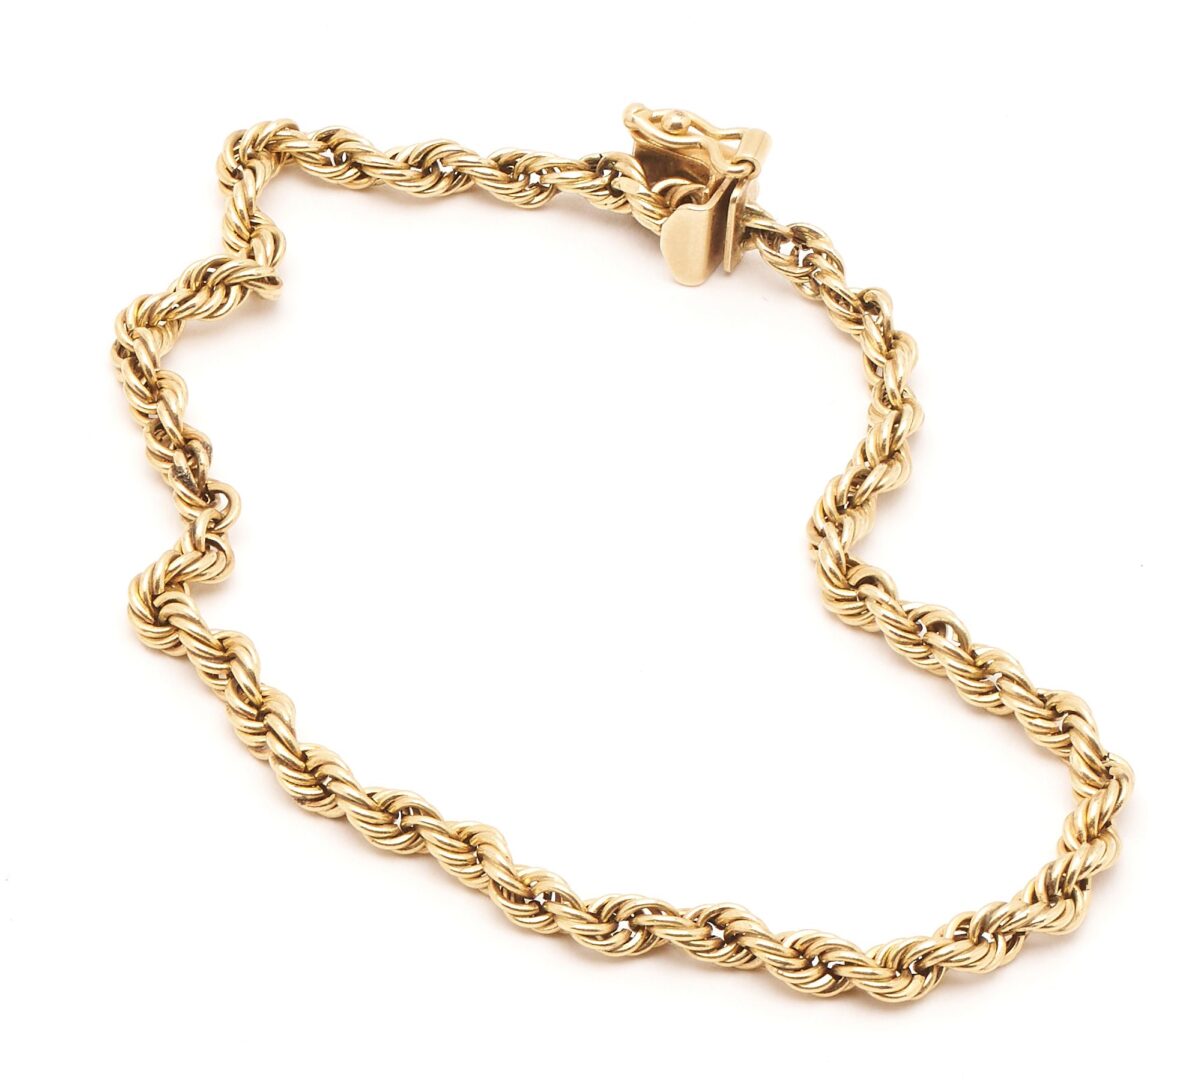 Lot 861: Four (4) Gold Rope Chain Bracelets